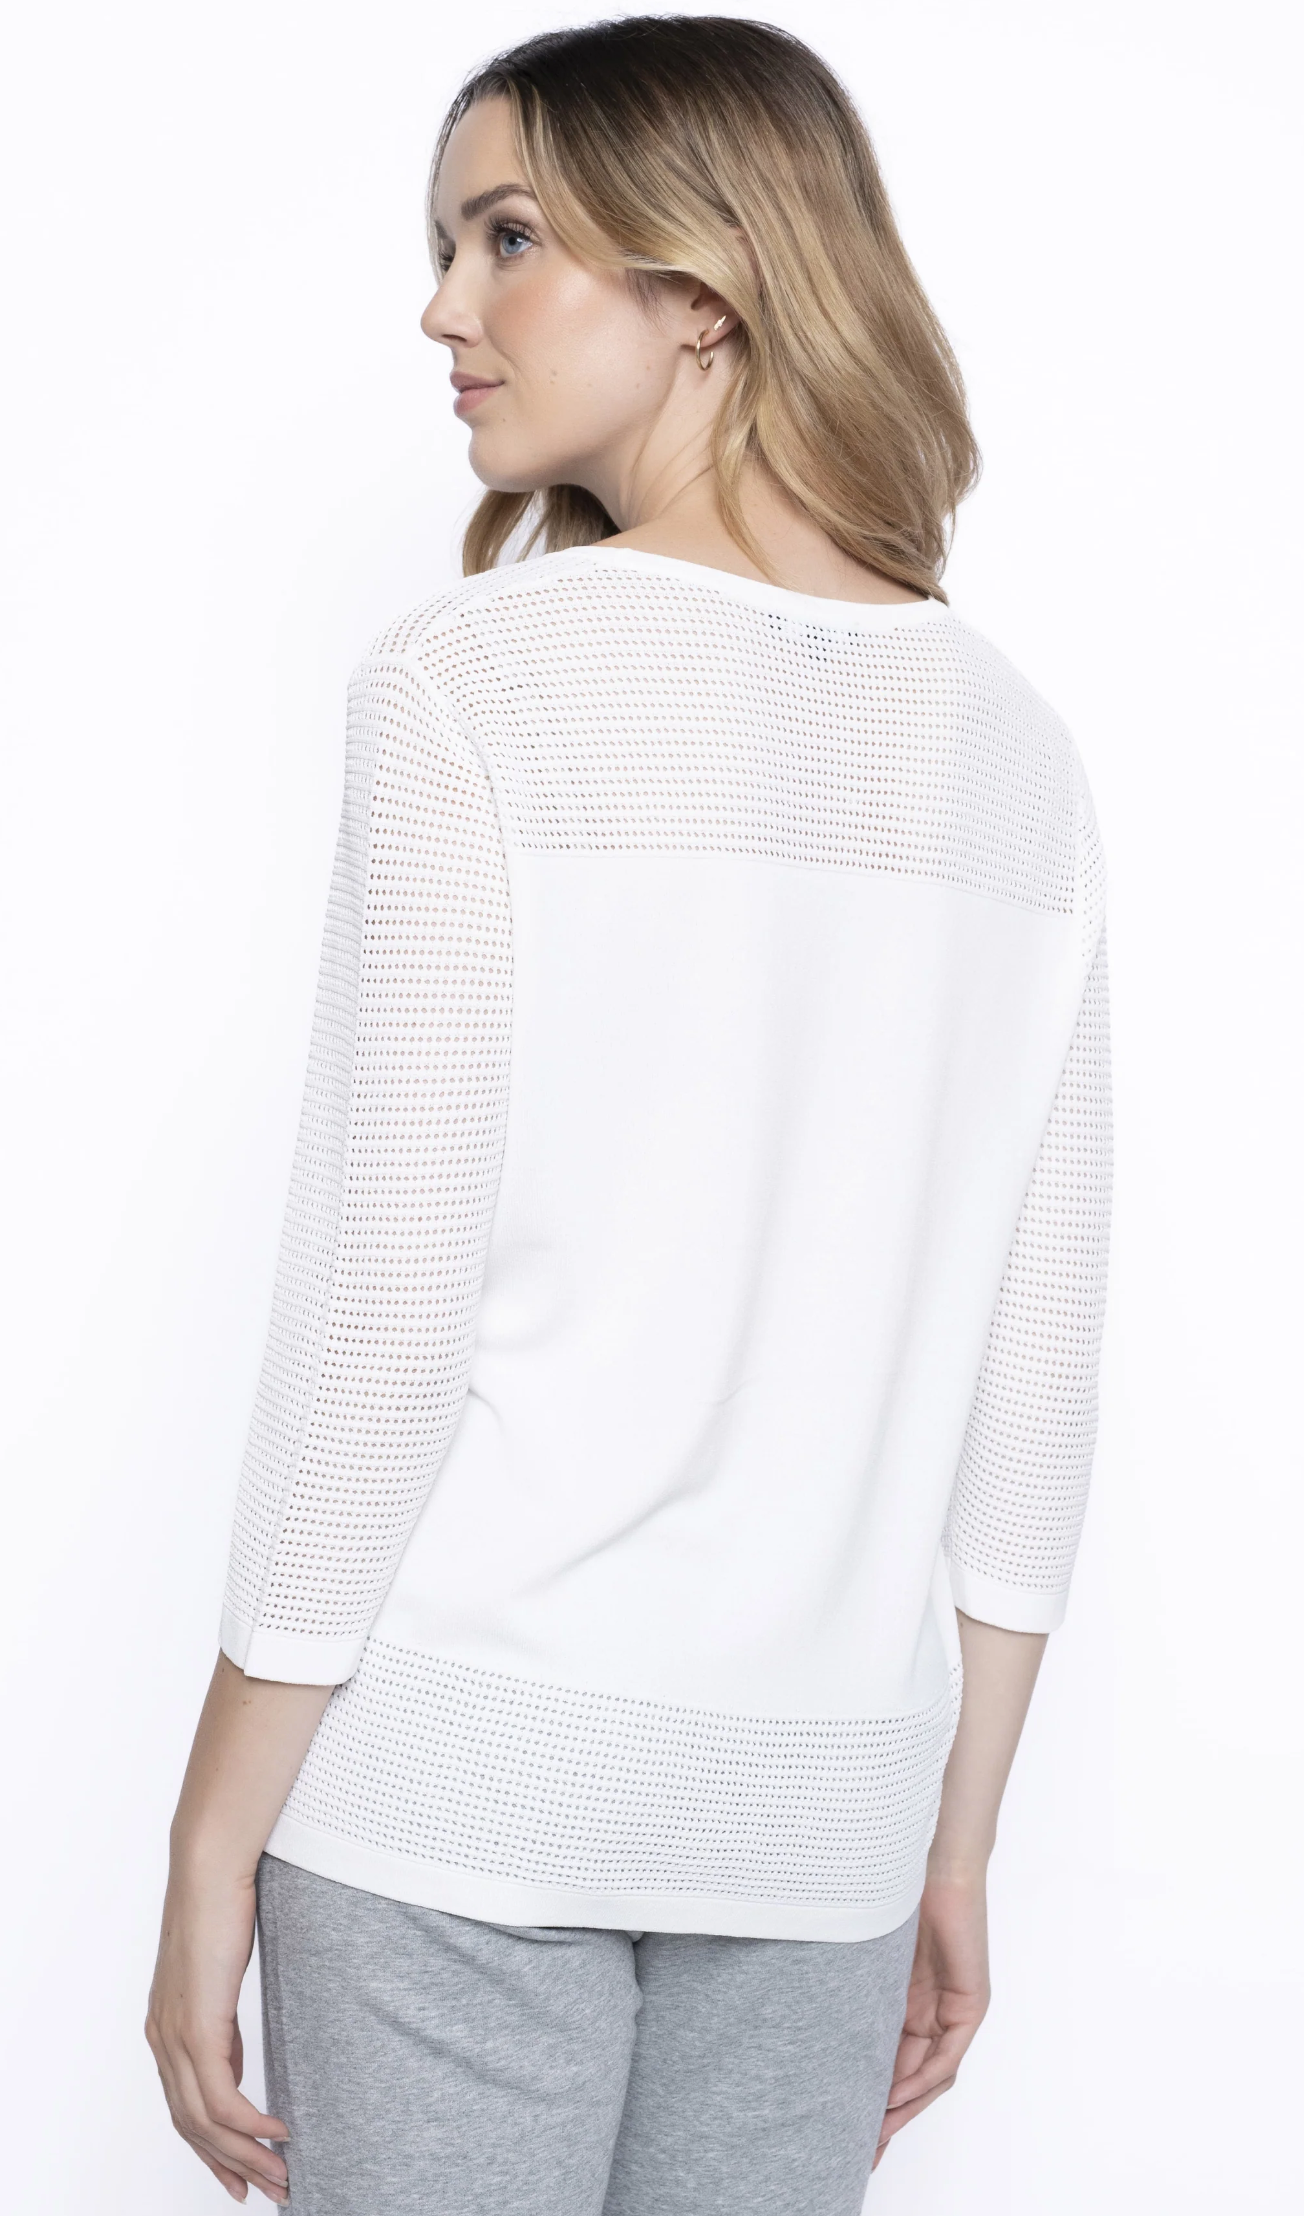 Life's A Breeze Layered Top, White